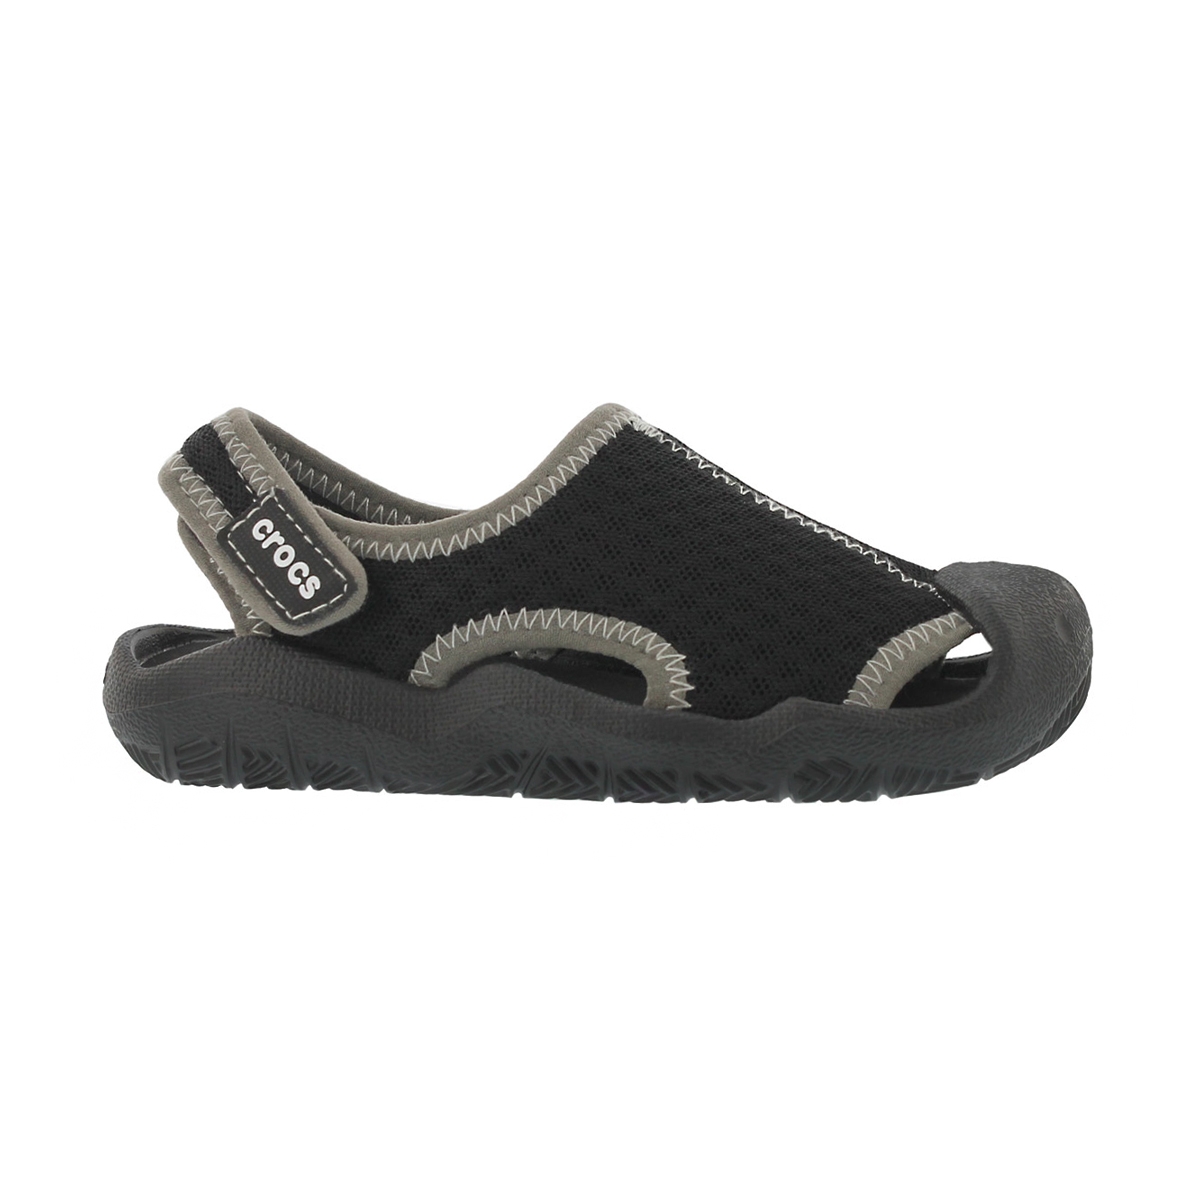 Boy's Swiftwater Casual Sandal -  Black/White